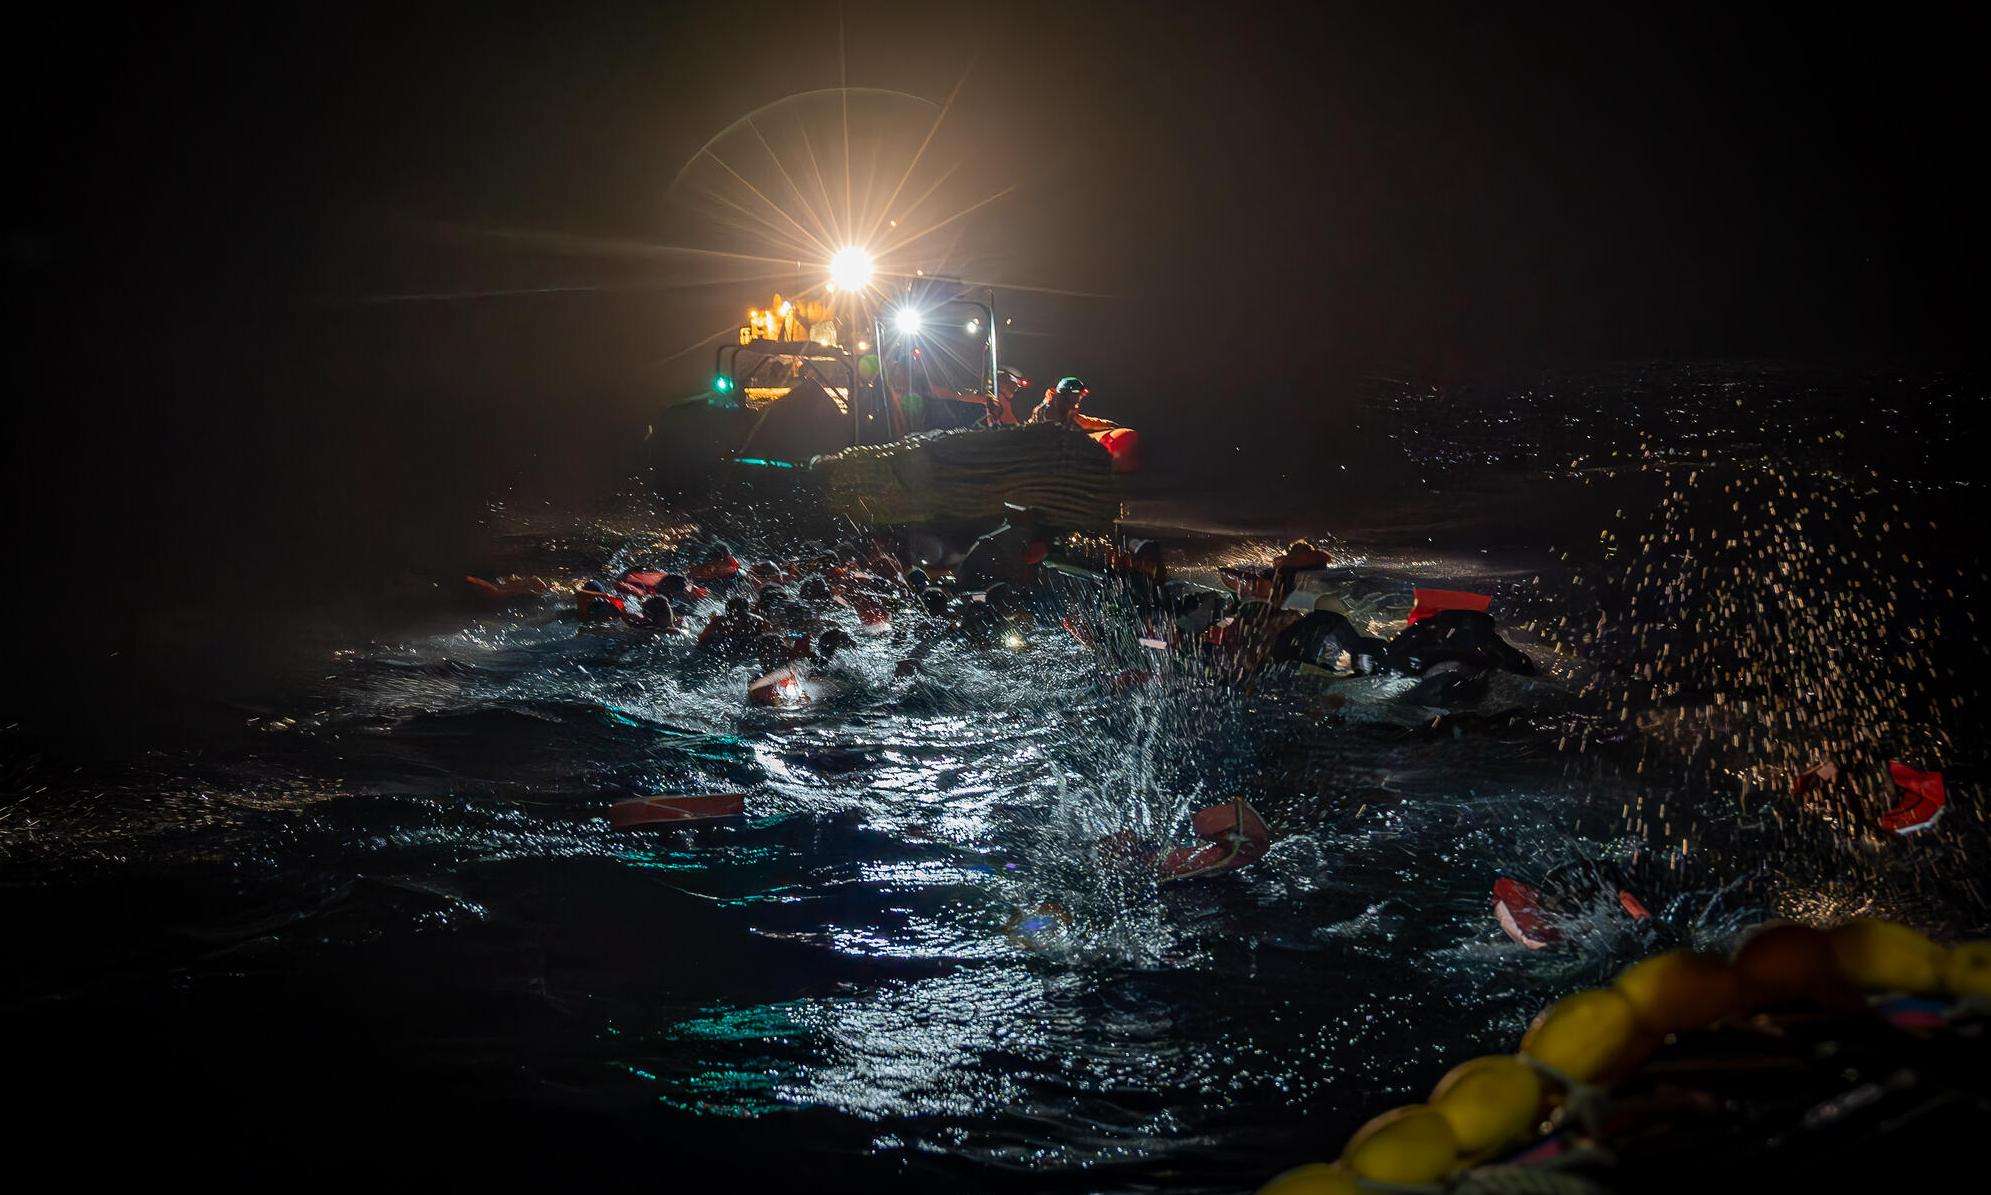 MSF search and rescue team rescues people from a boat in distress in the Central Mediterranean.